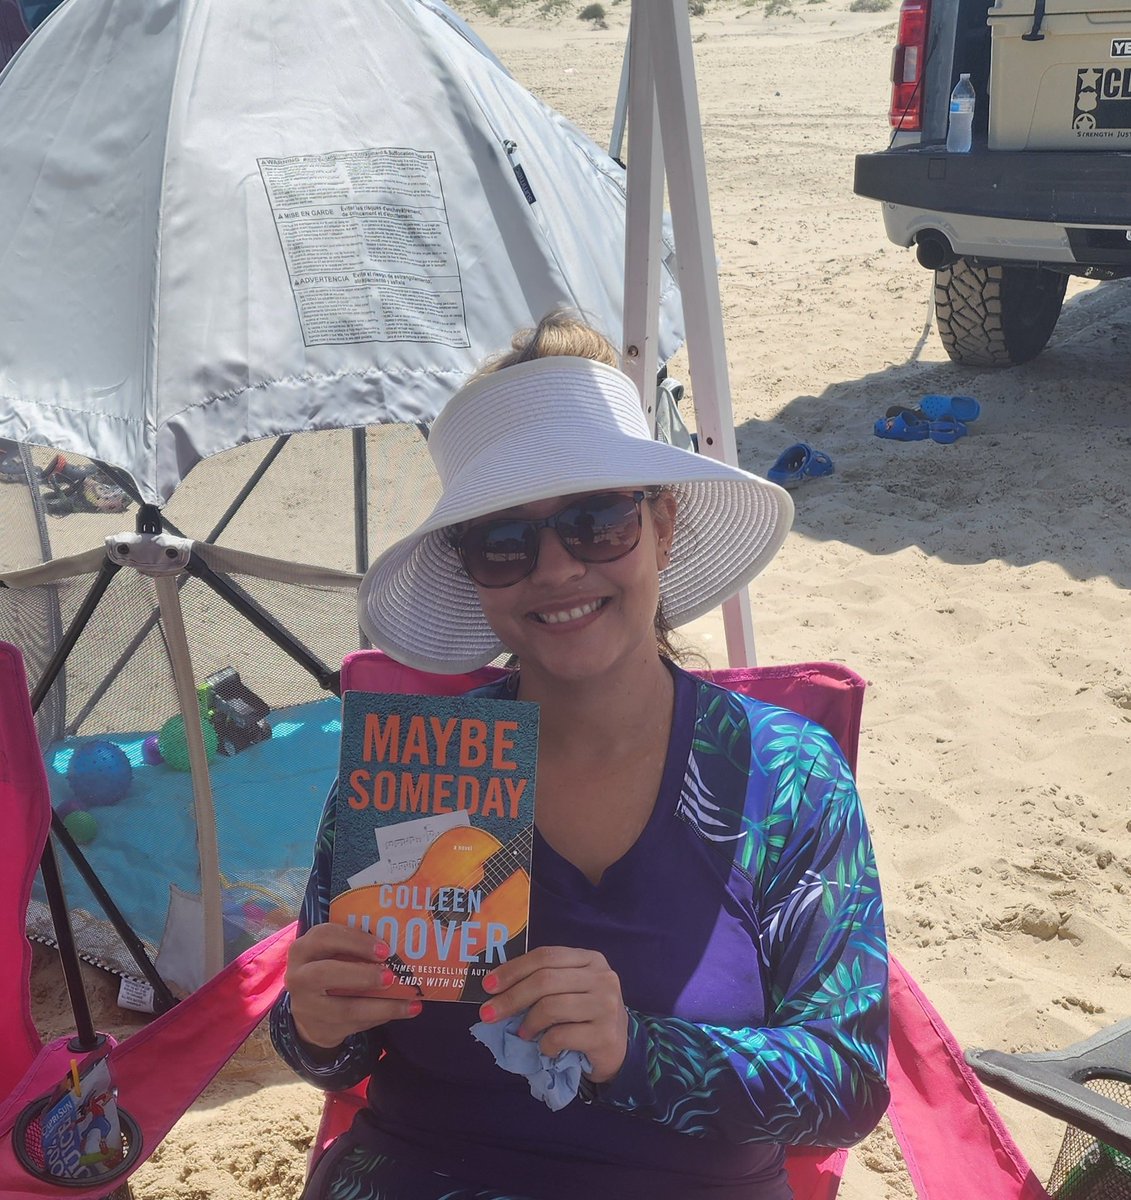 Good afternoon, Golden Bears 🐻 I hope you're having a fun and safe summer. I'm enjoying my summer break reading at the beach! I would love to see what you're reading, post your pictures in the comments. Let's fill out those Bright Summer Reading Logs #carmanreads